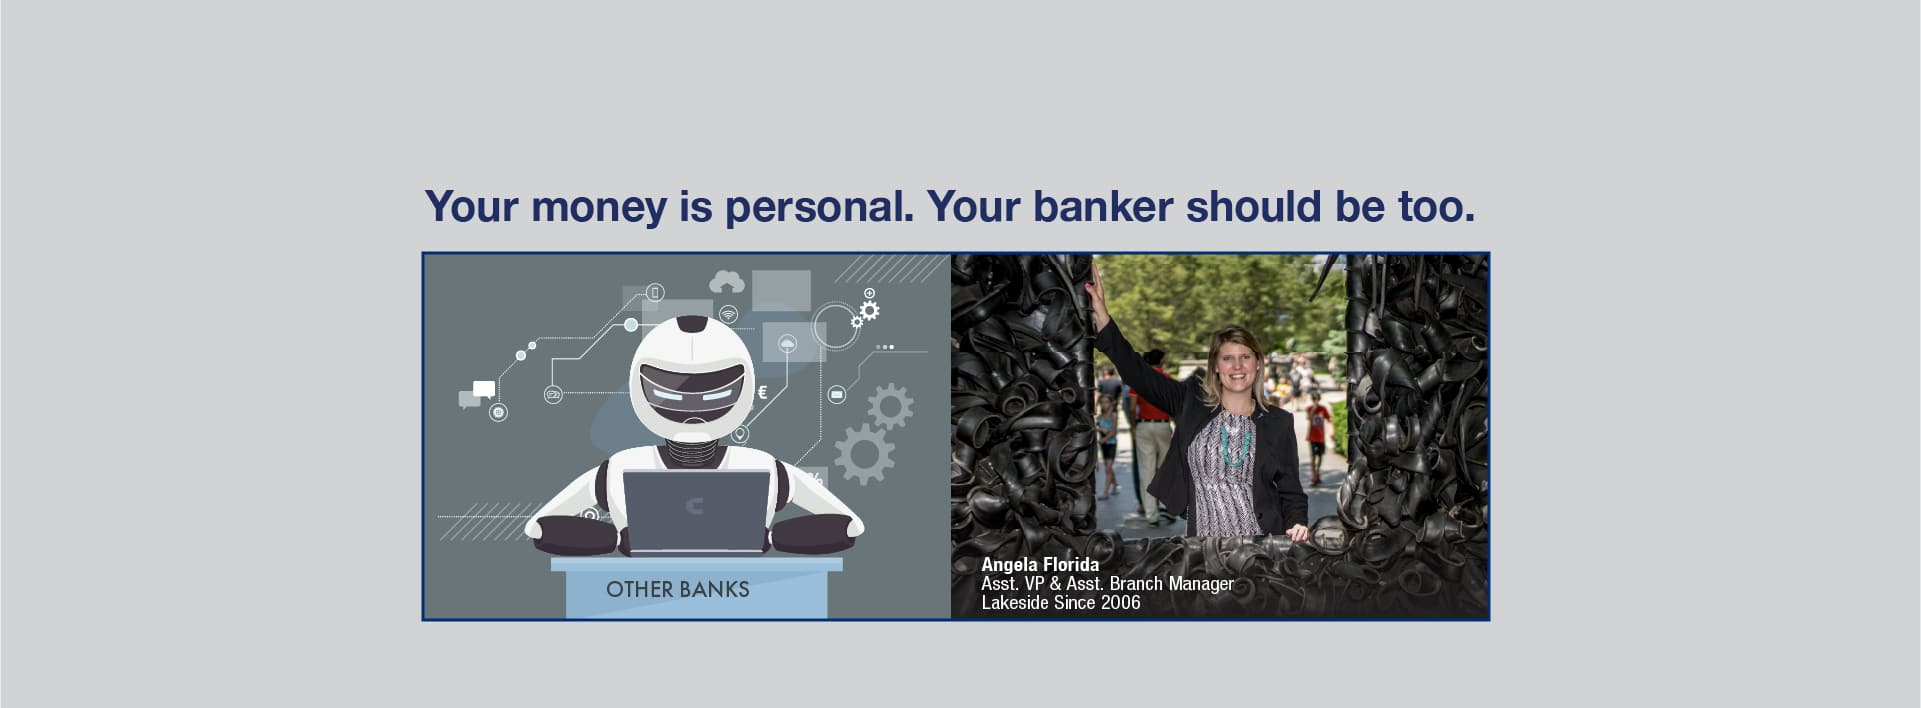 Your money is personal.your banker should be too.